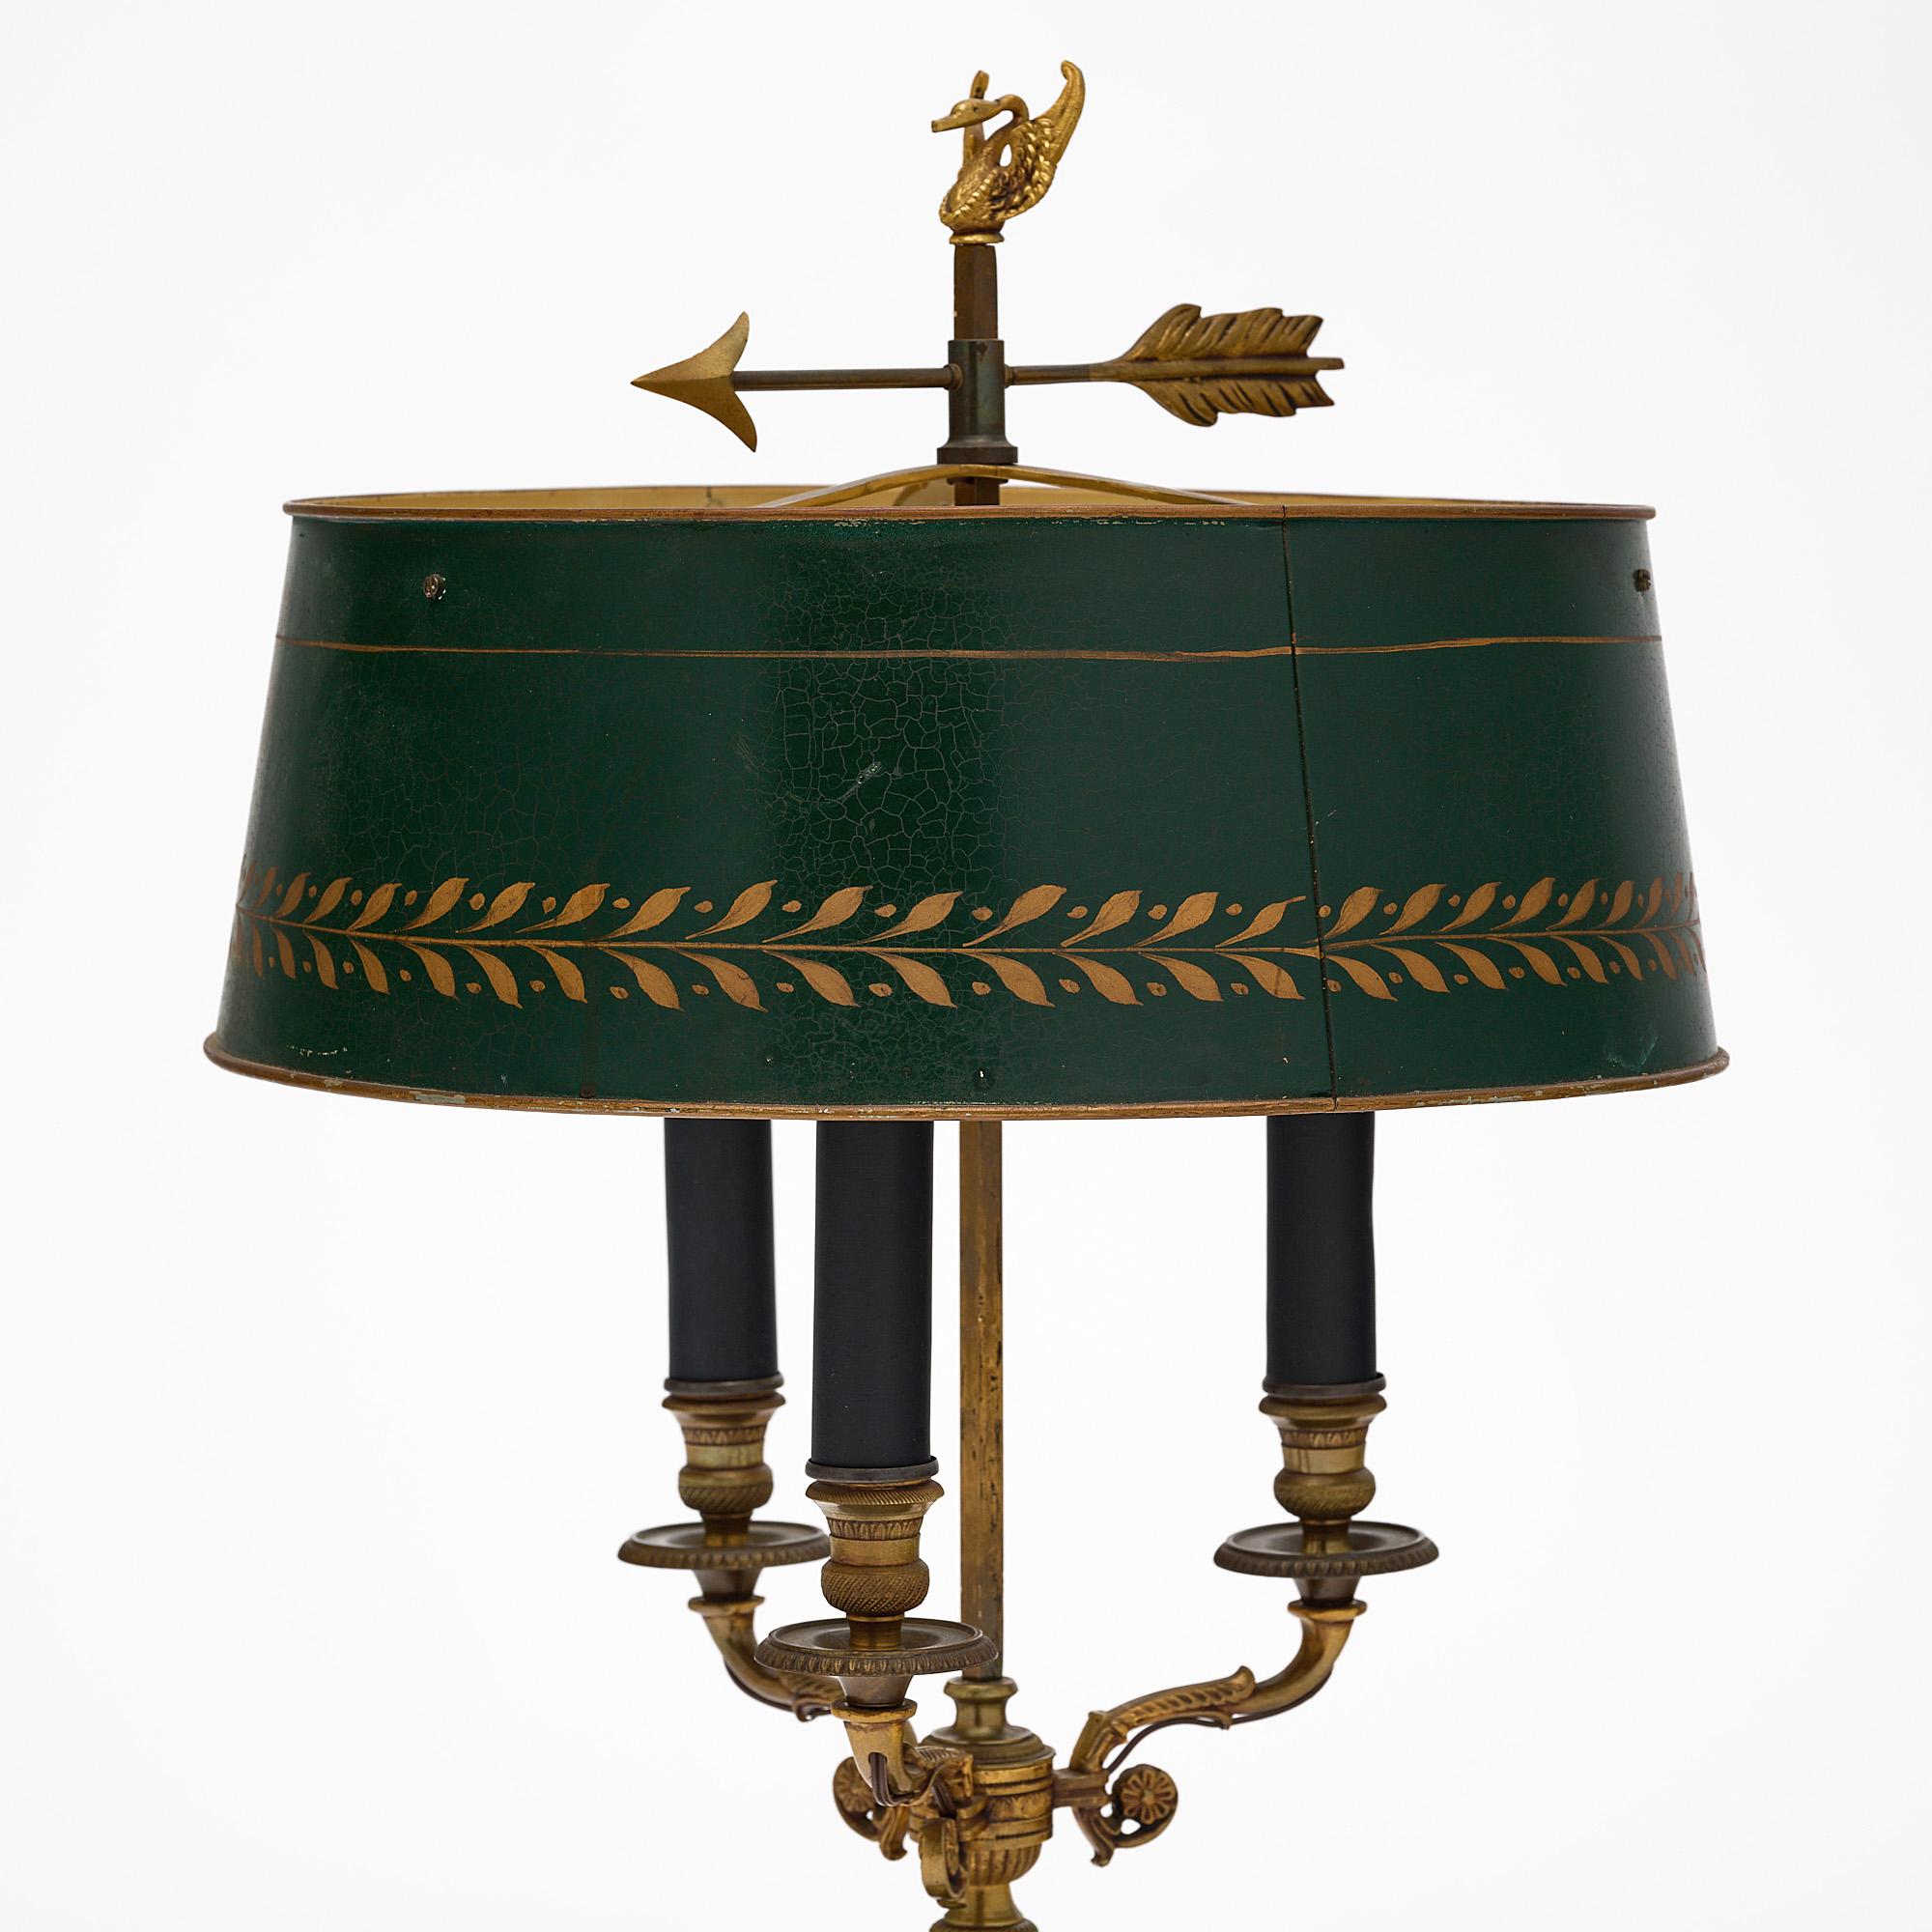 Bouillote lamp, French, in the Empire style. This French antique lamp features three candelabras and a green painted tole shade with a gold leaf frieze. On its top sits a decorative finial representing a swan on an arrow. It has been newly wired to